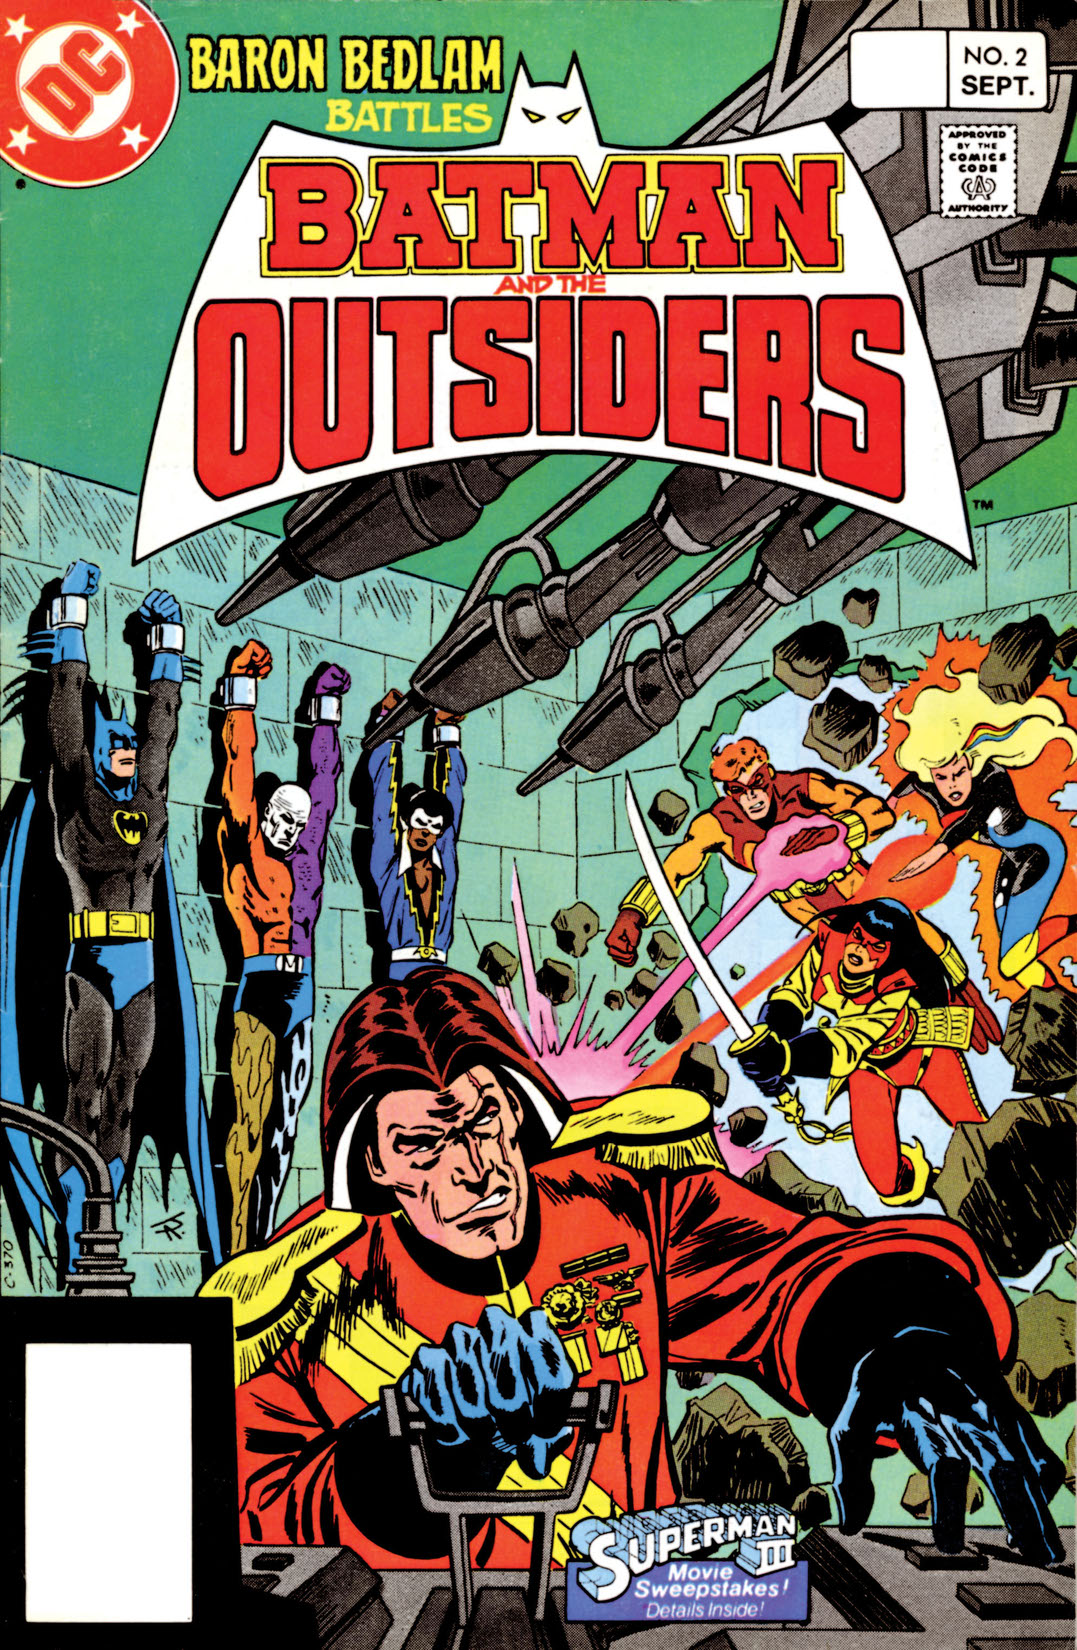 Batman and the Outsiders (1983-) #2 preview images